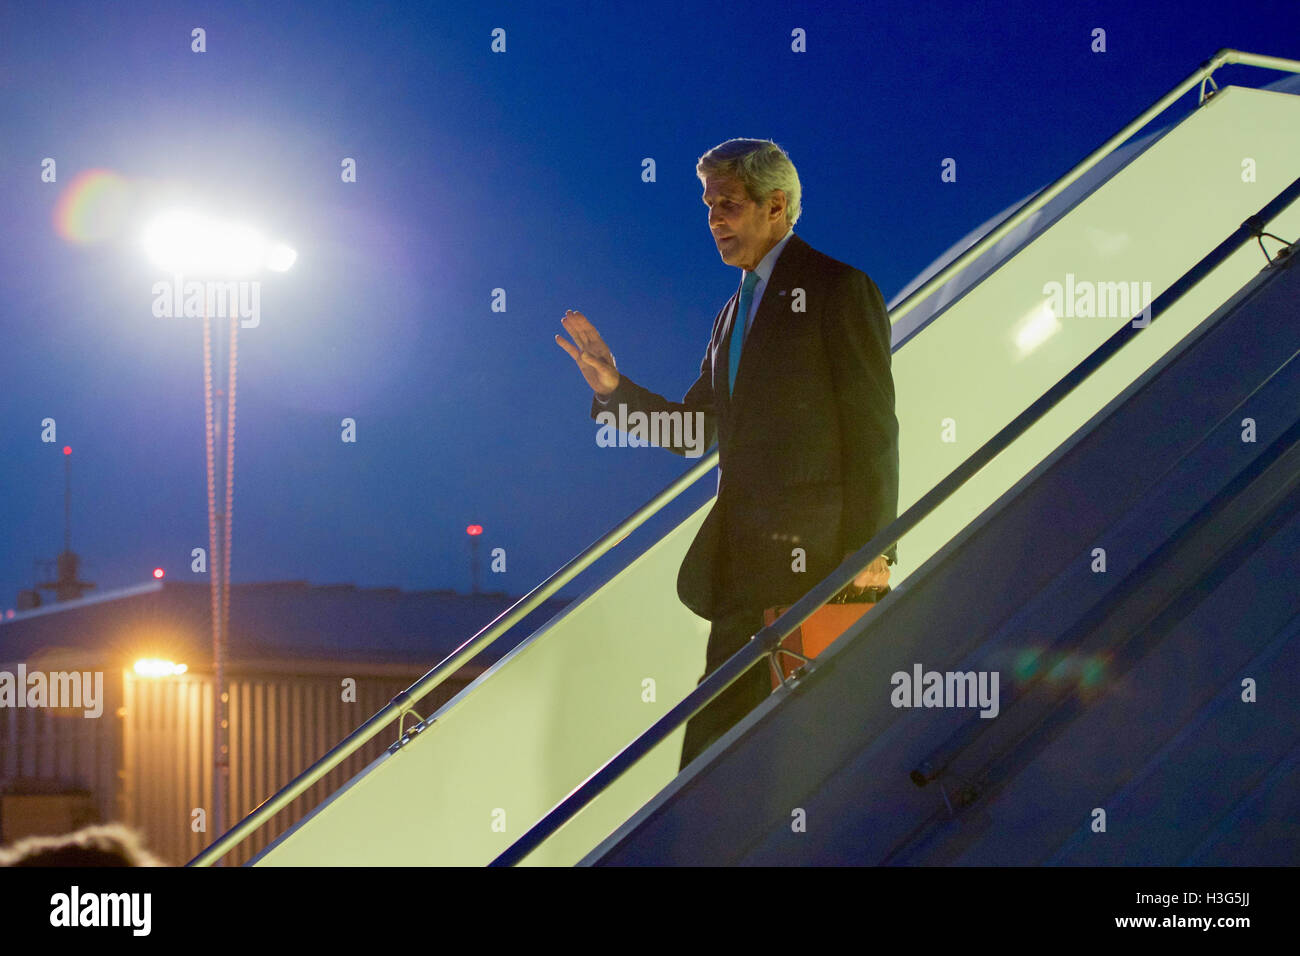 U.S. Secretary of State John Kerry waves as he deplanes on September 9, 2016, at the Geneva Airport in Geneva, Switzerland, as he arrives following an overnight flight from Washington for meetings with Russian Foreign Minister Sergey Lavrov focused on Syria. Stock Photo